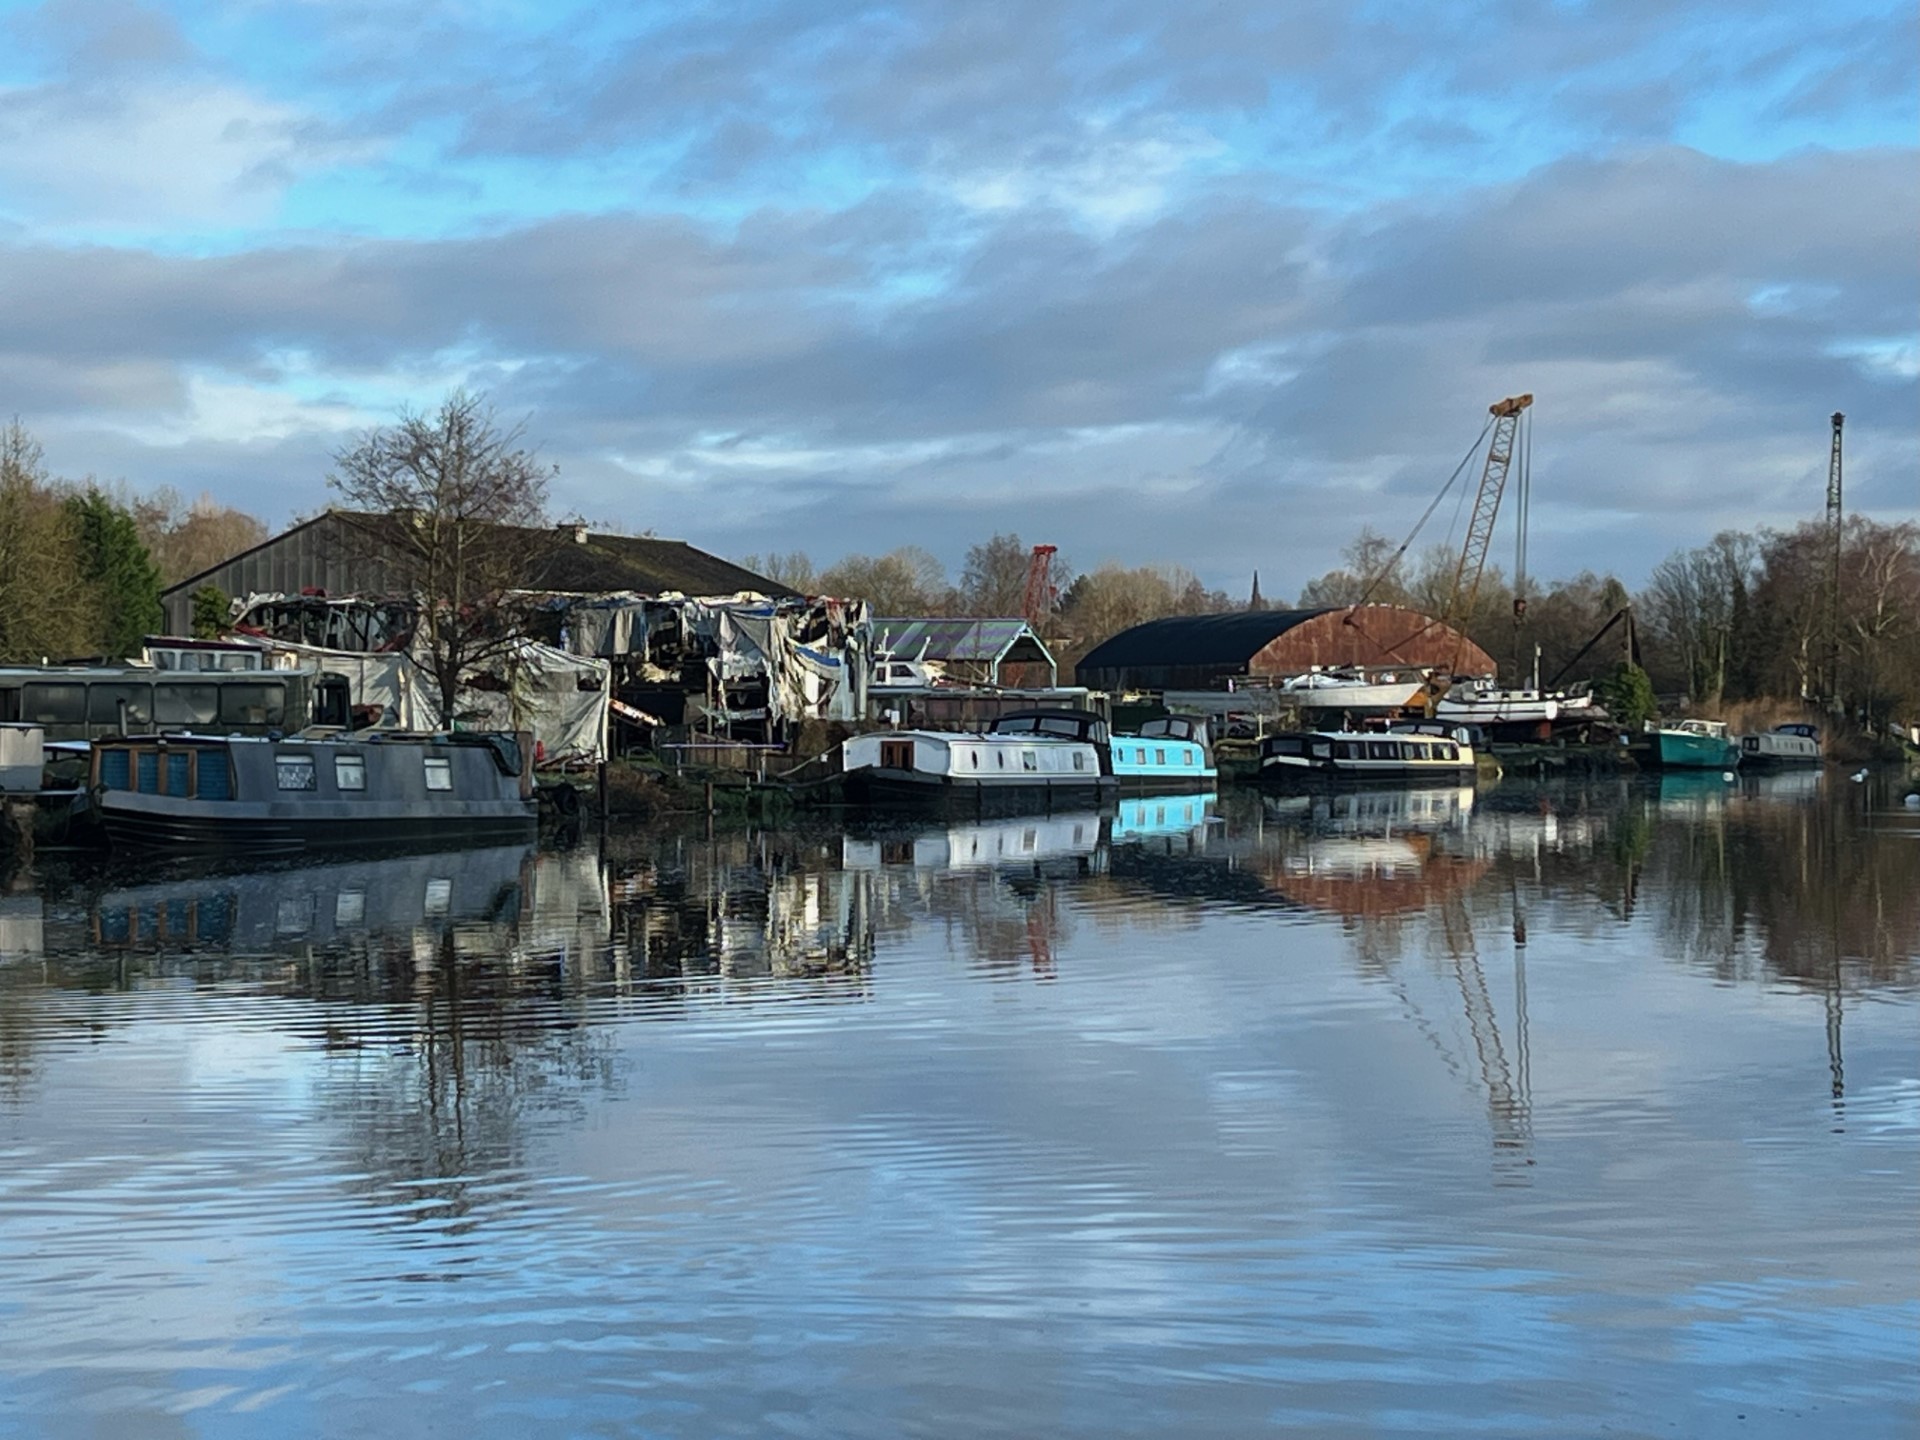 The Weaver boatyard in February by Peter Clayton